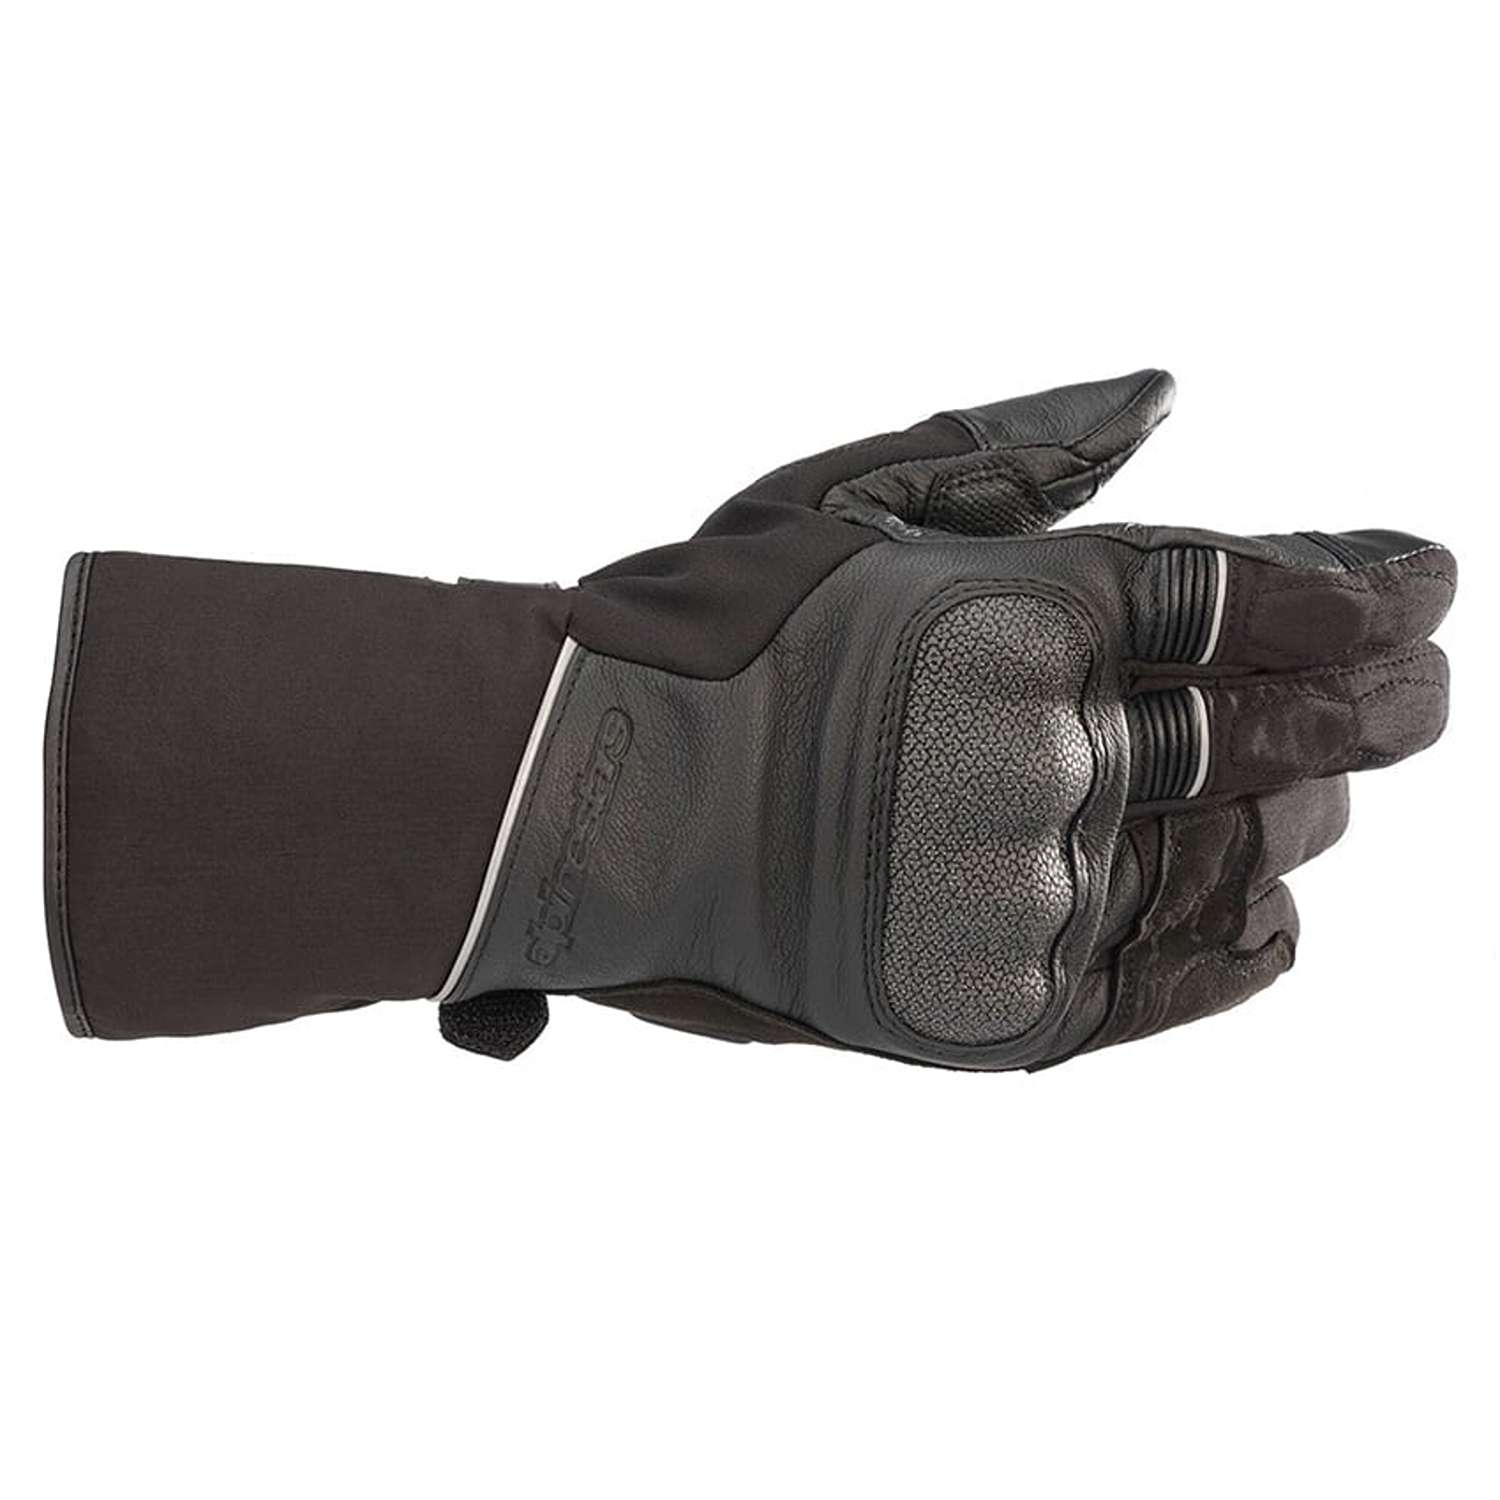 Image of Alpinestars Wr-2 V2 Gore-Tex Gloves With Gore Grip Technology Black Talla L